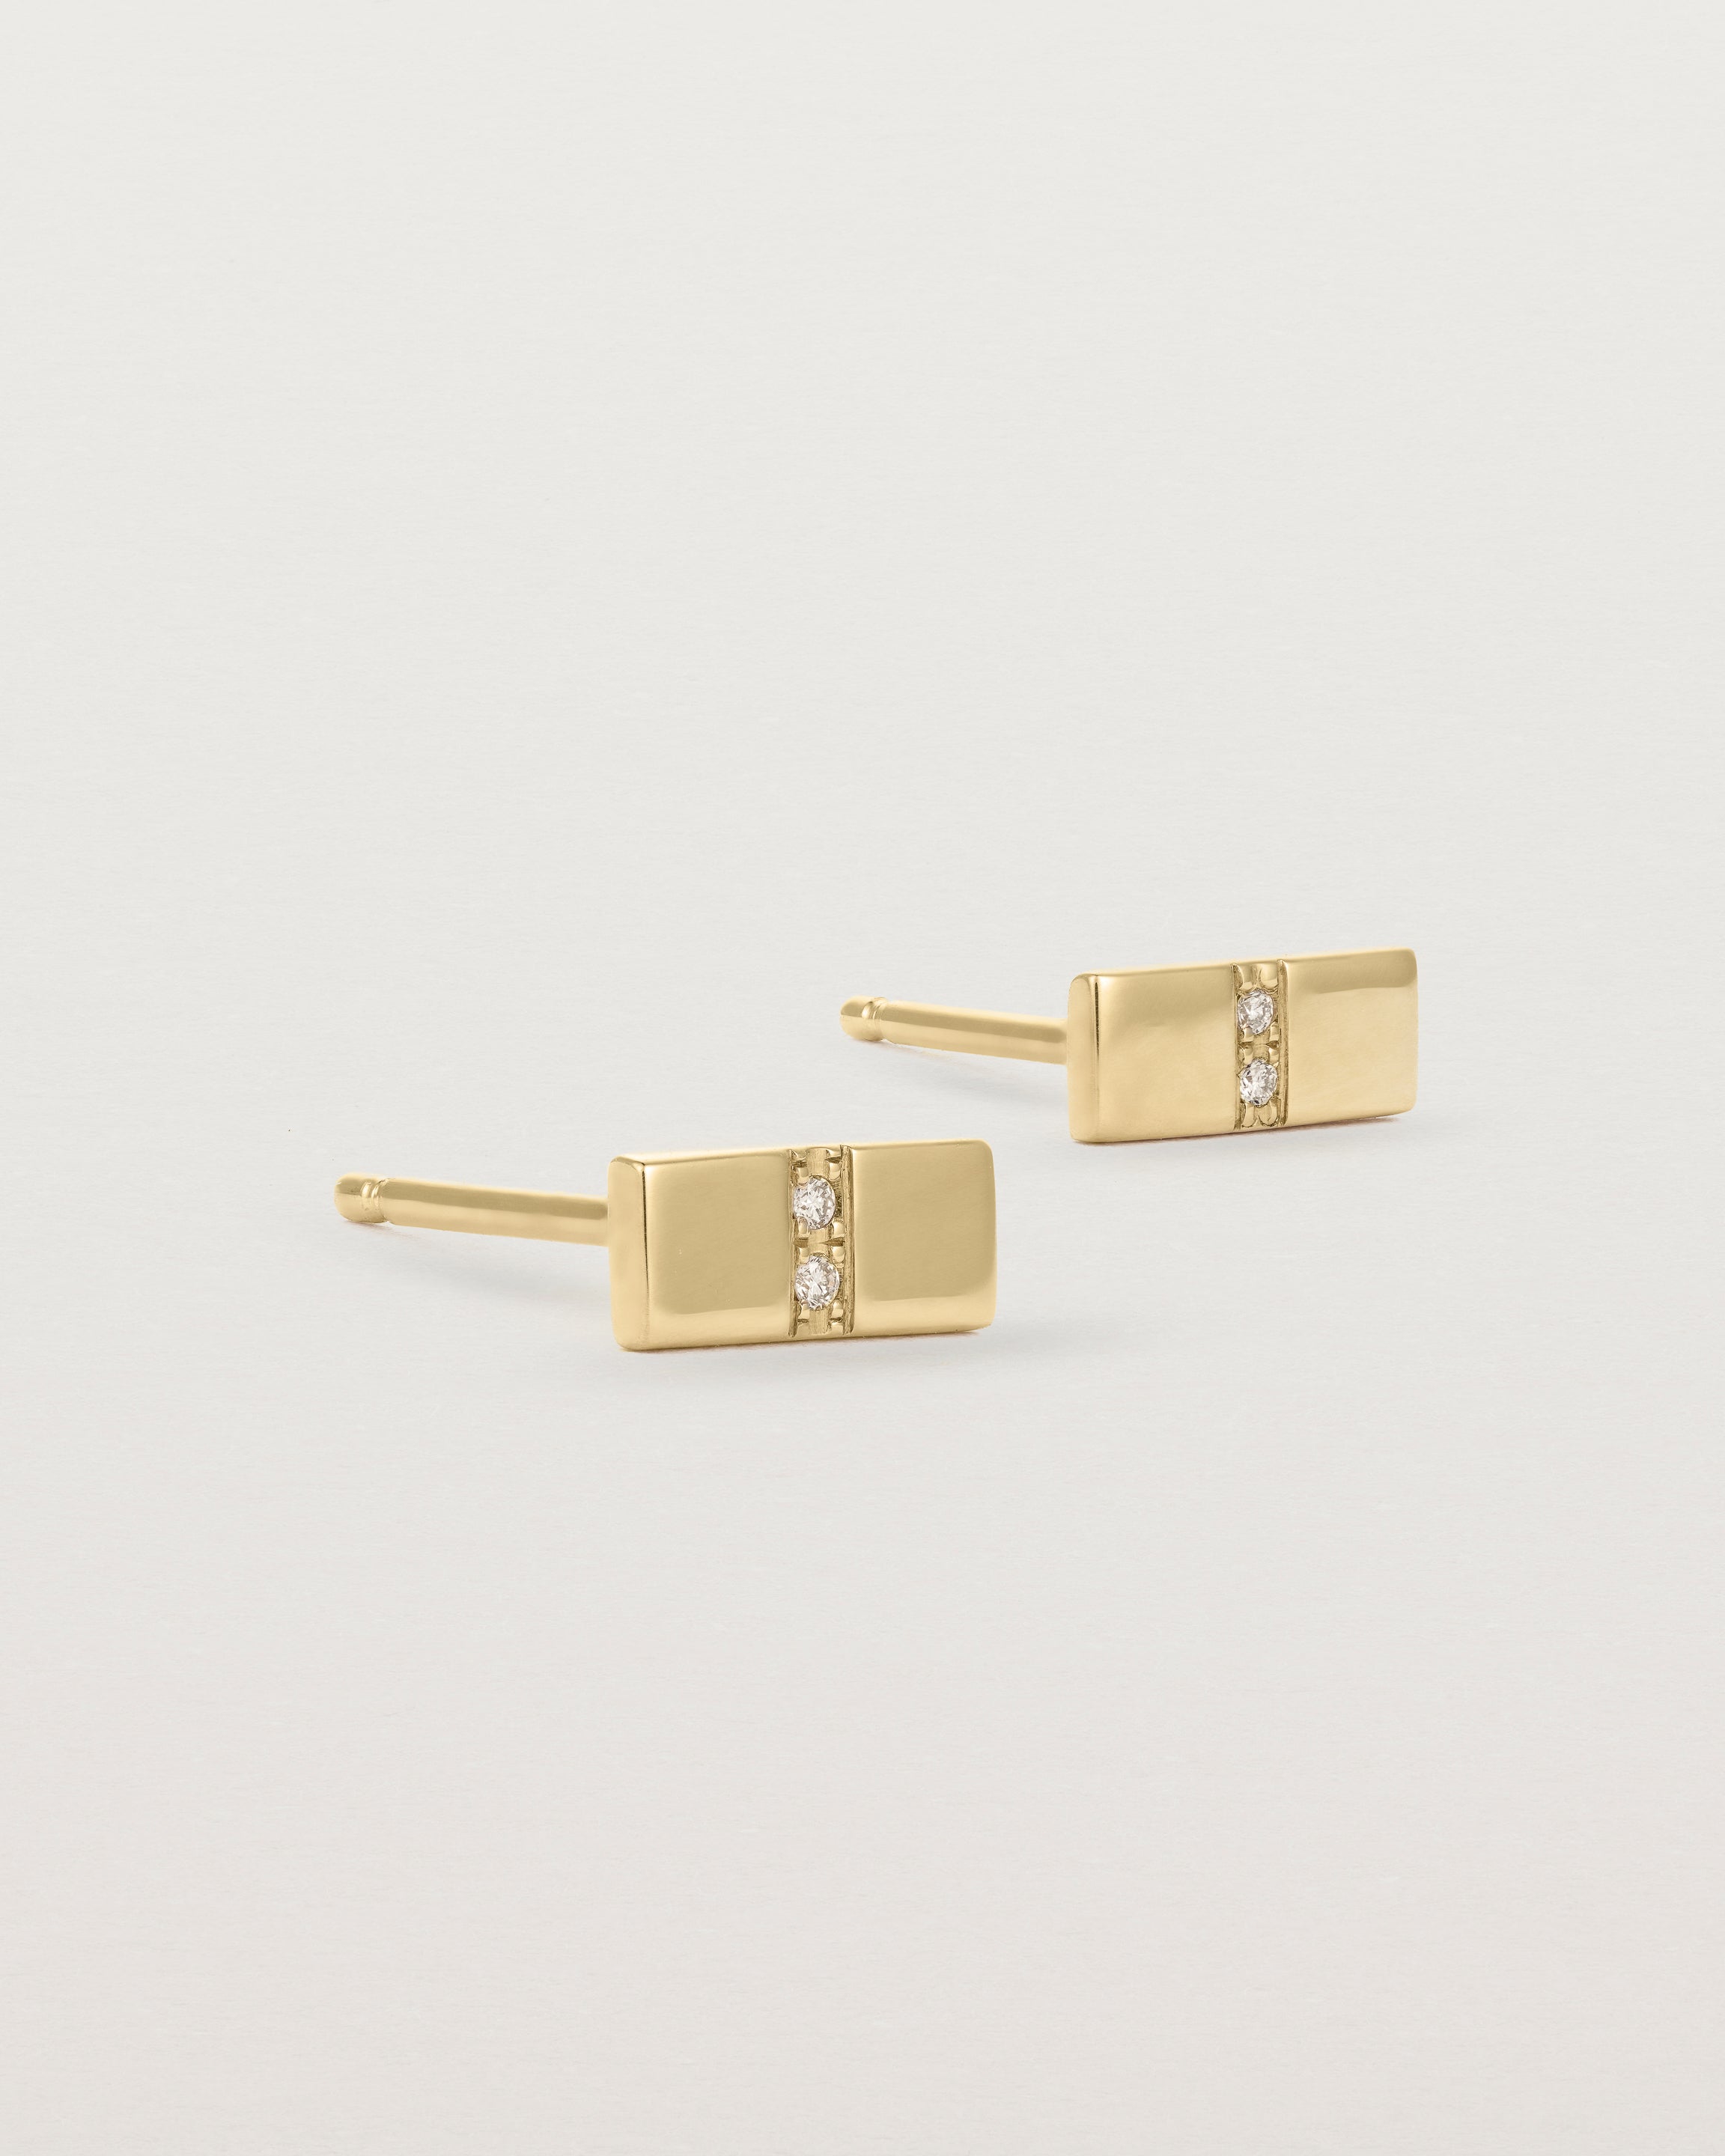 A pair of small yellow gold rectangle studs featuring two white diamonds set in the centre